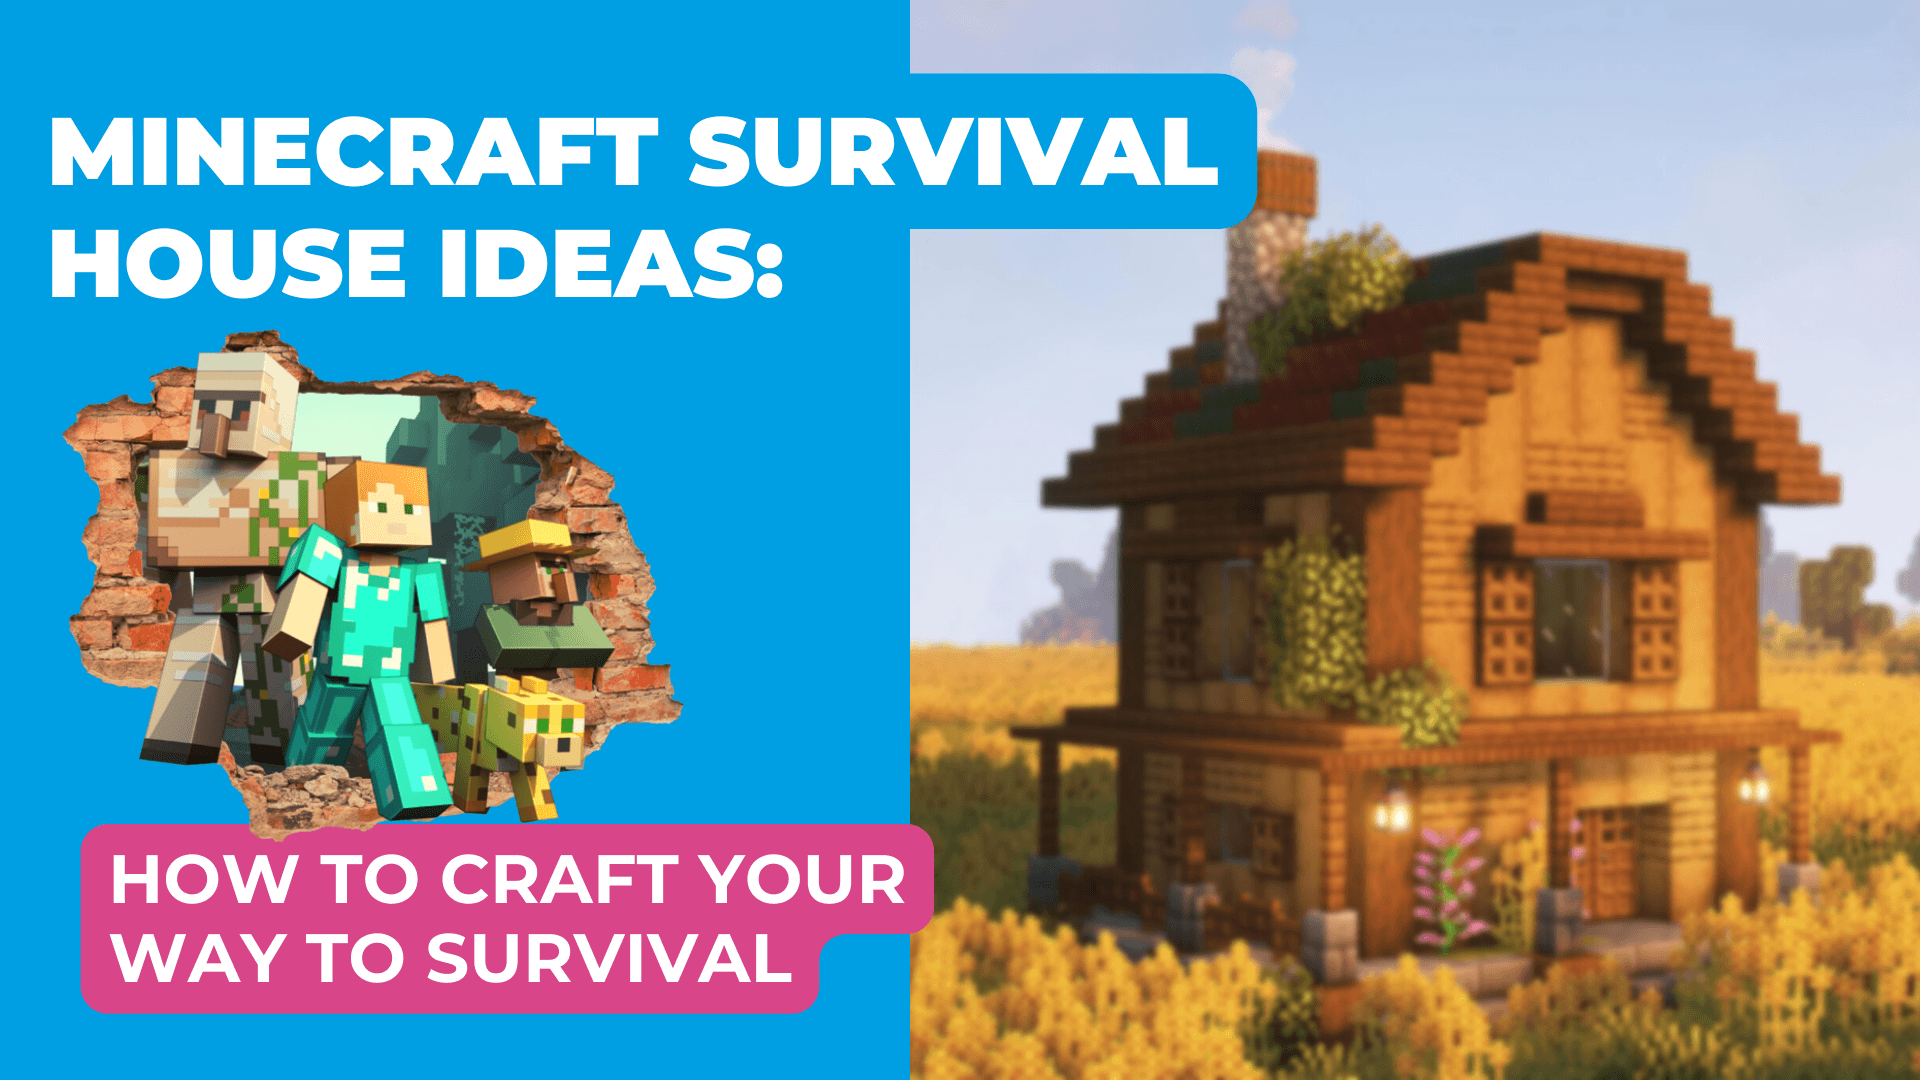 Minecraft survival house ideas: how to craft your way to survival - Gamestate